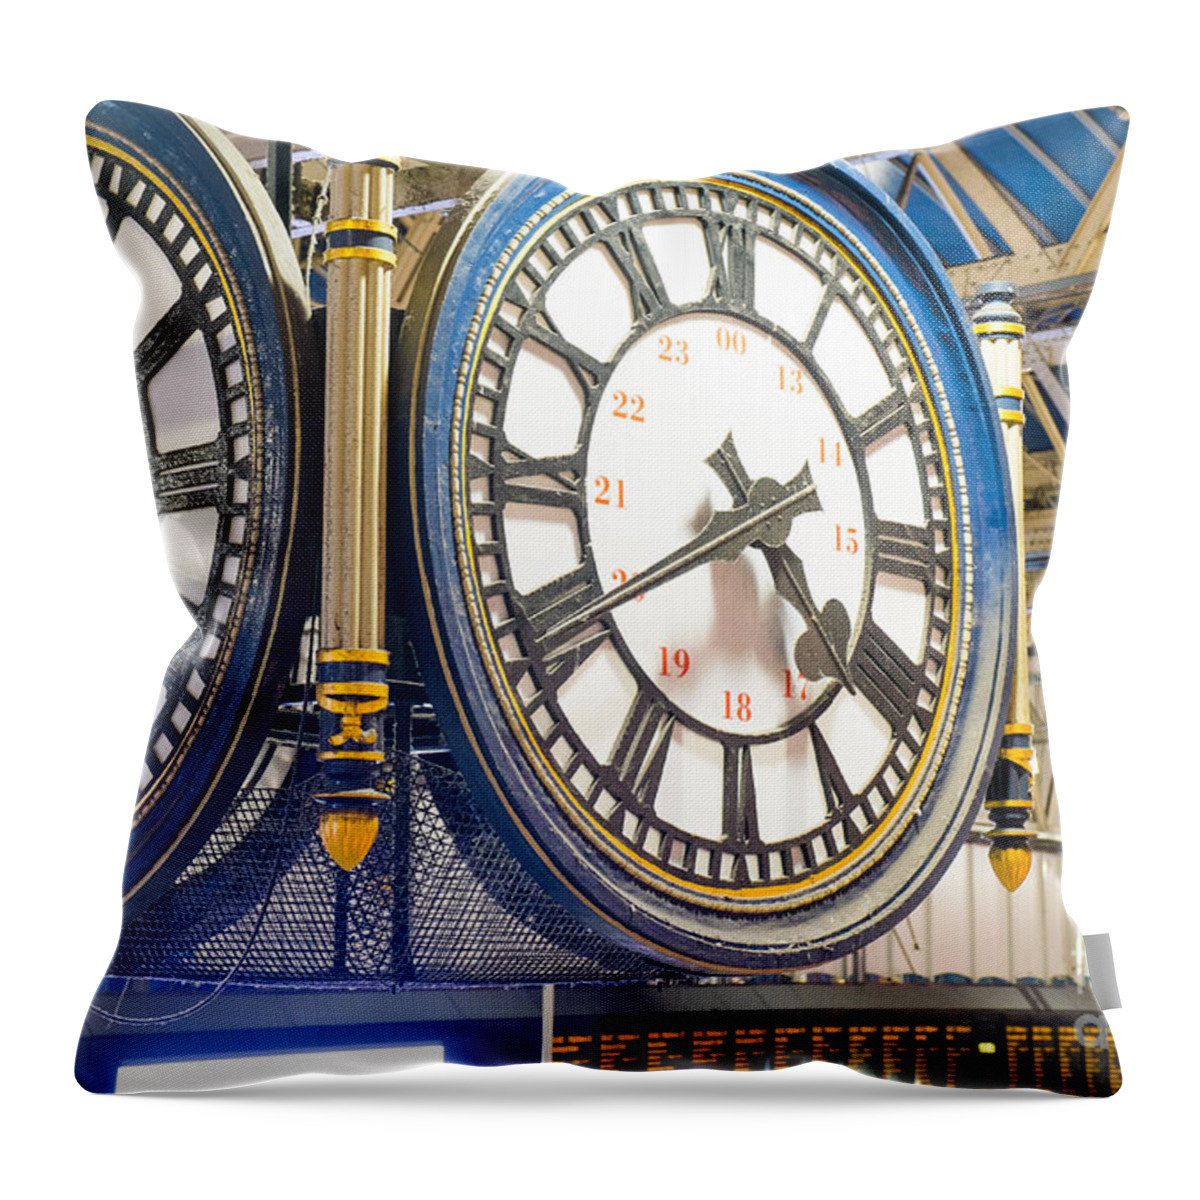 2015 Throw Pillow featuring the photograph London Waterloo Station Clock #1 by Martin Berry